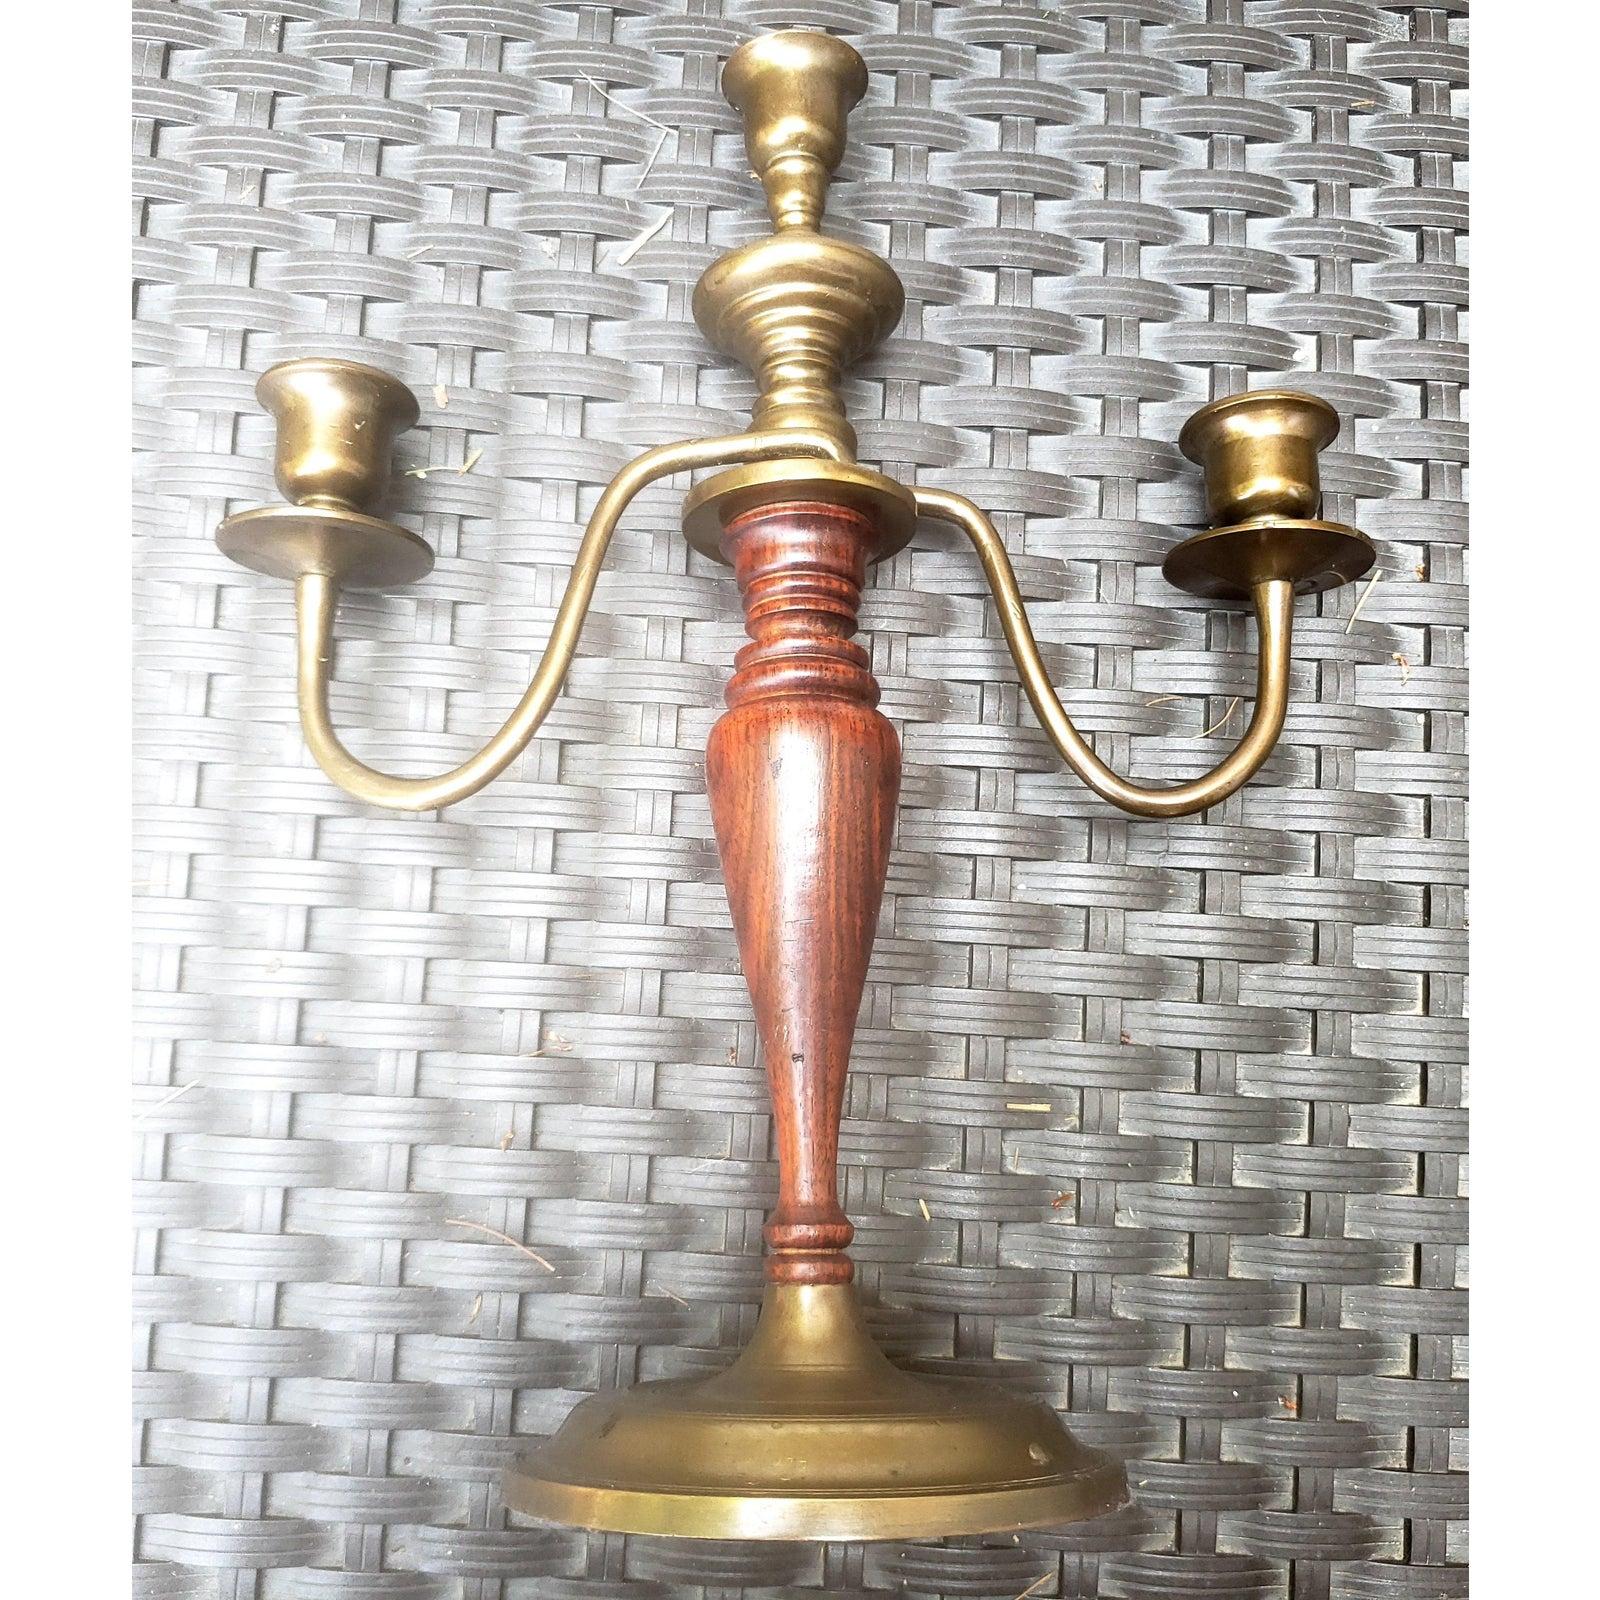 American 19th Century Mahogany and Brass Candelabras, a Pair For Sale